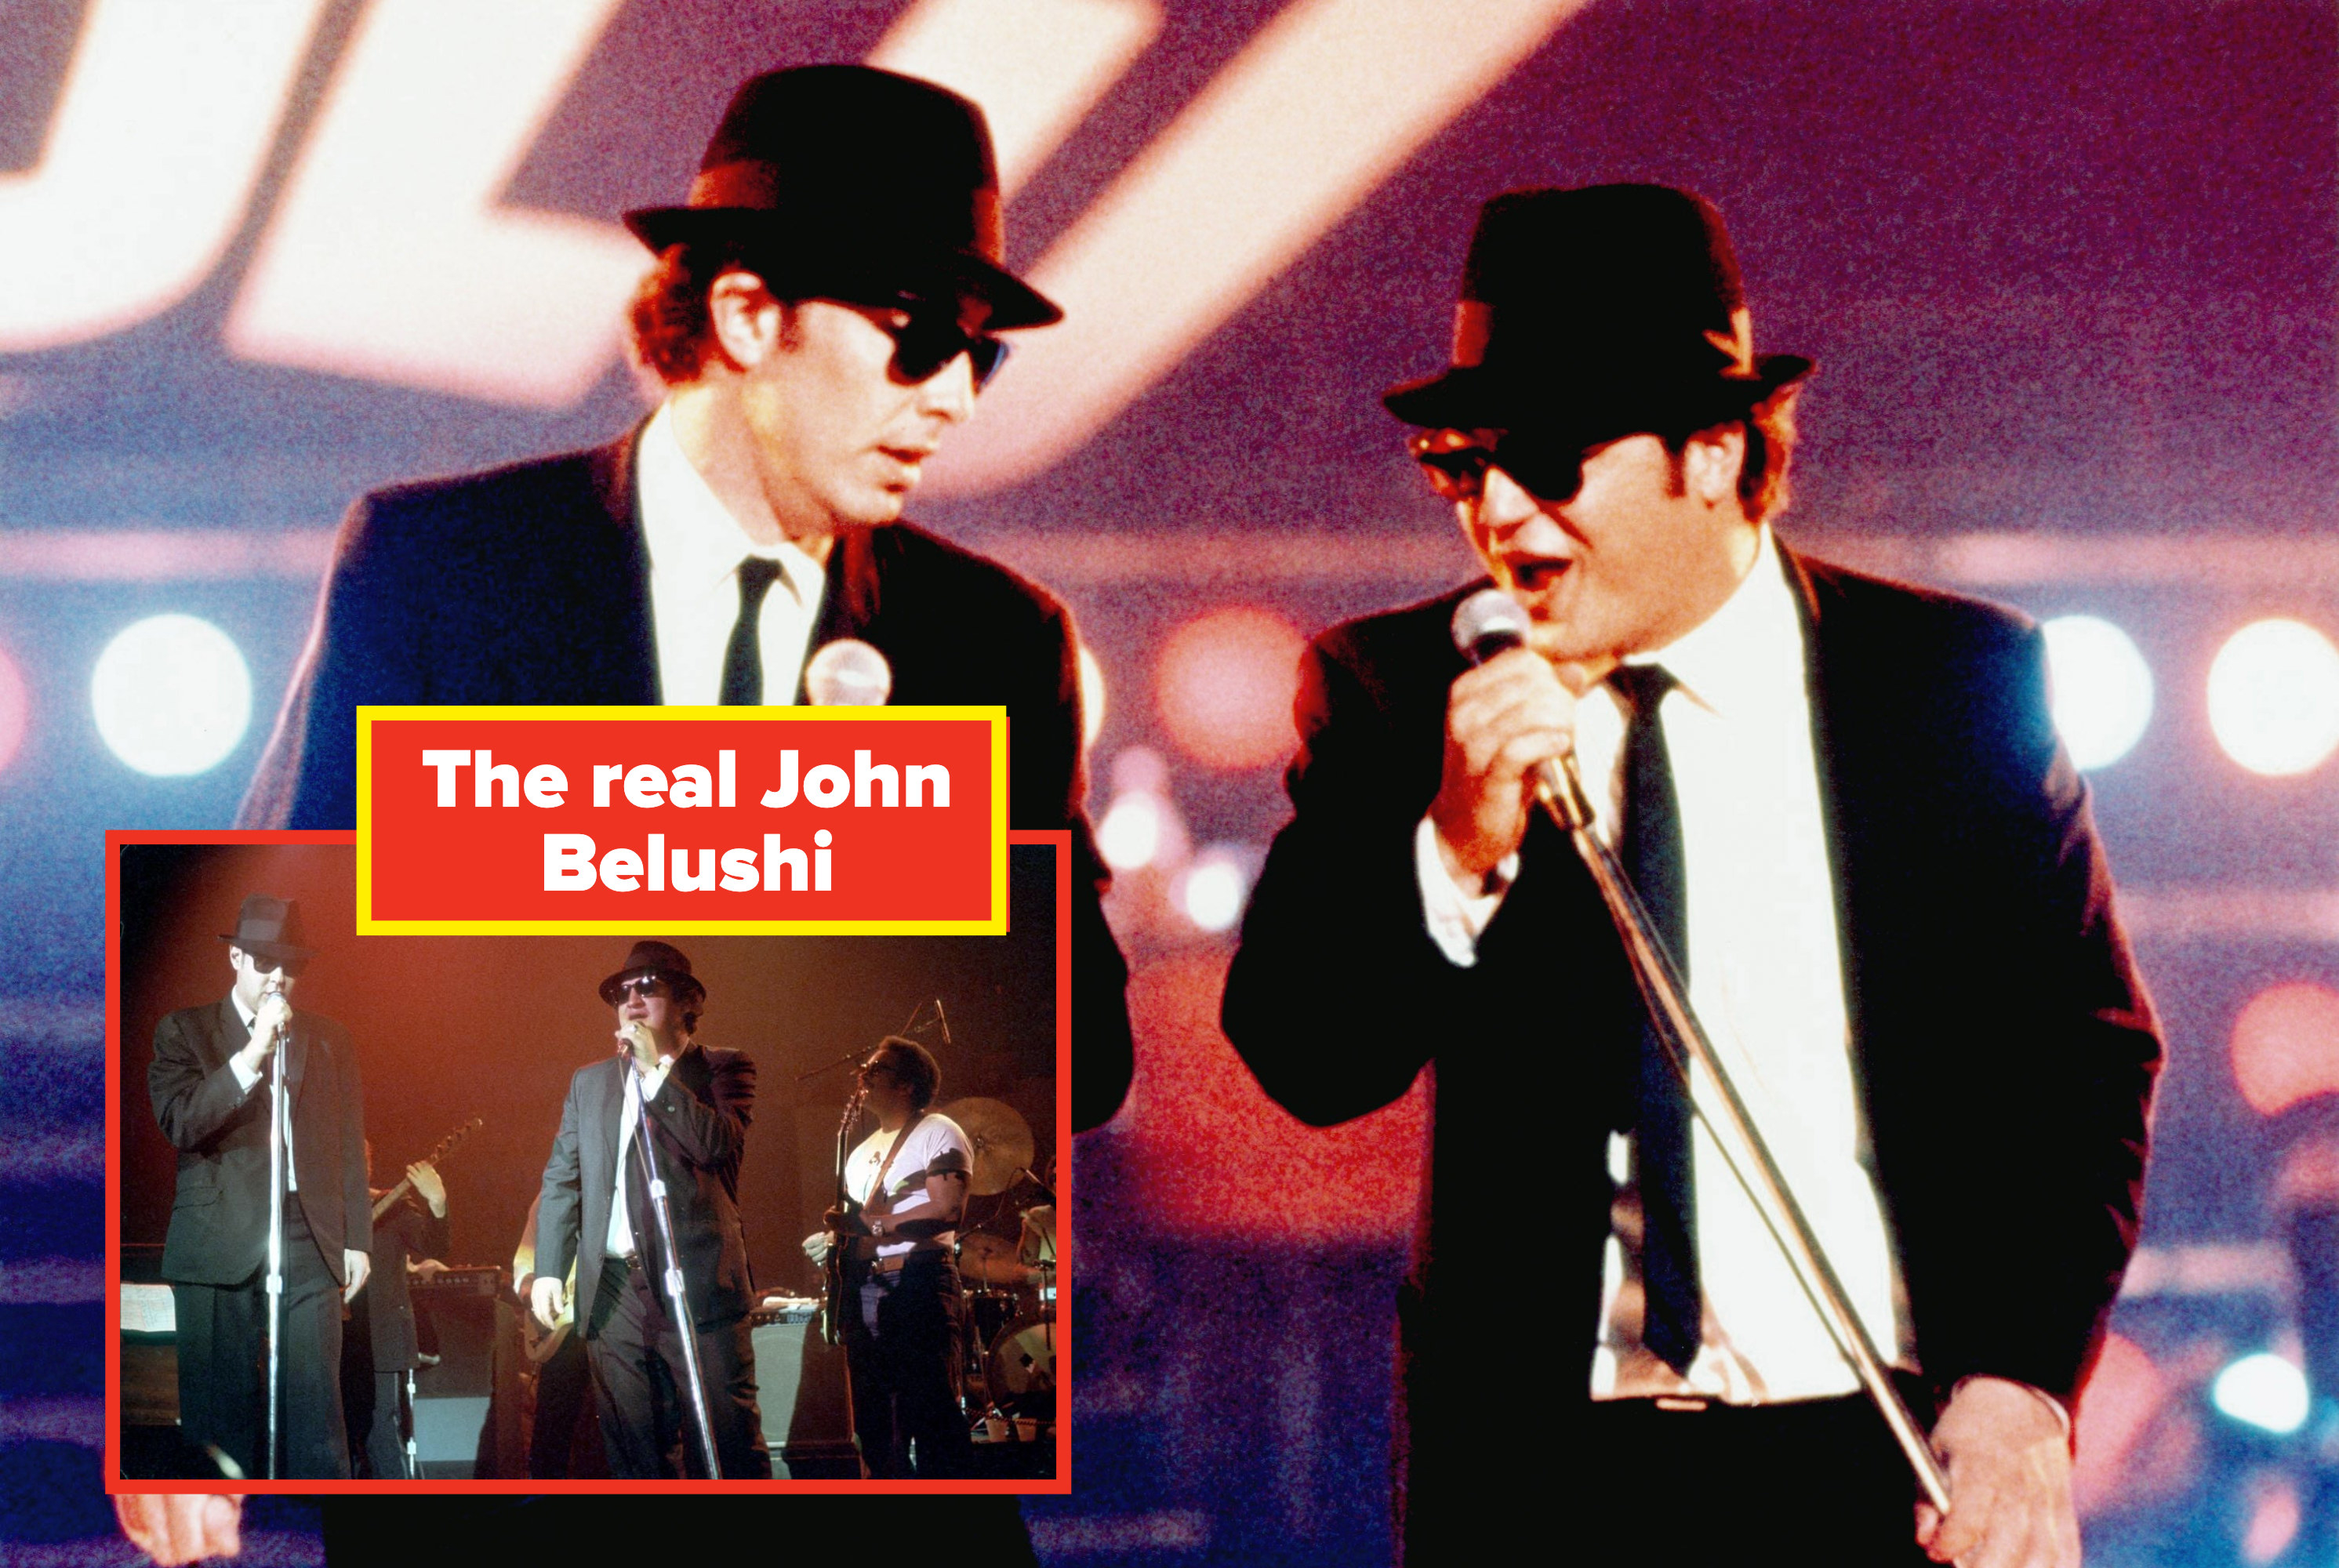 Michael Chiklis performs as John Belushi in &quot;Wired&quot; with the real Belushi in an inset